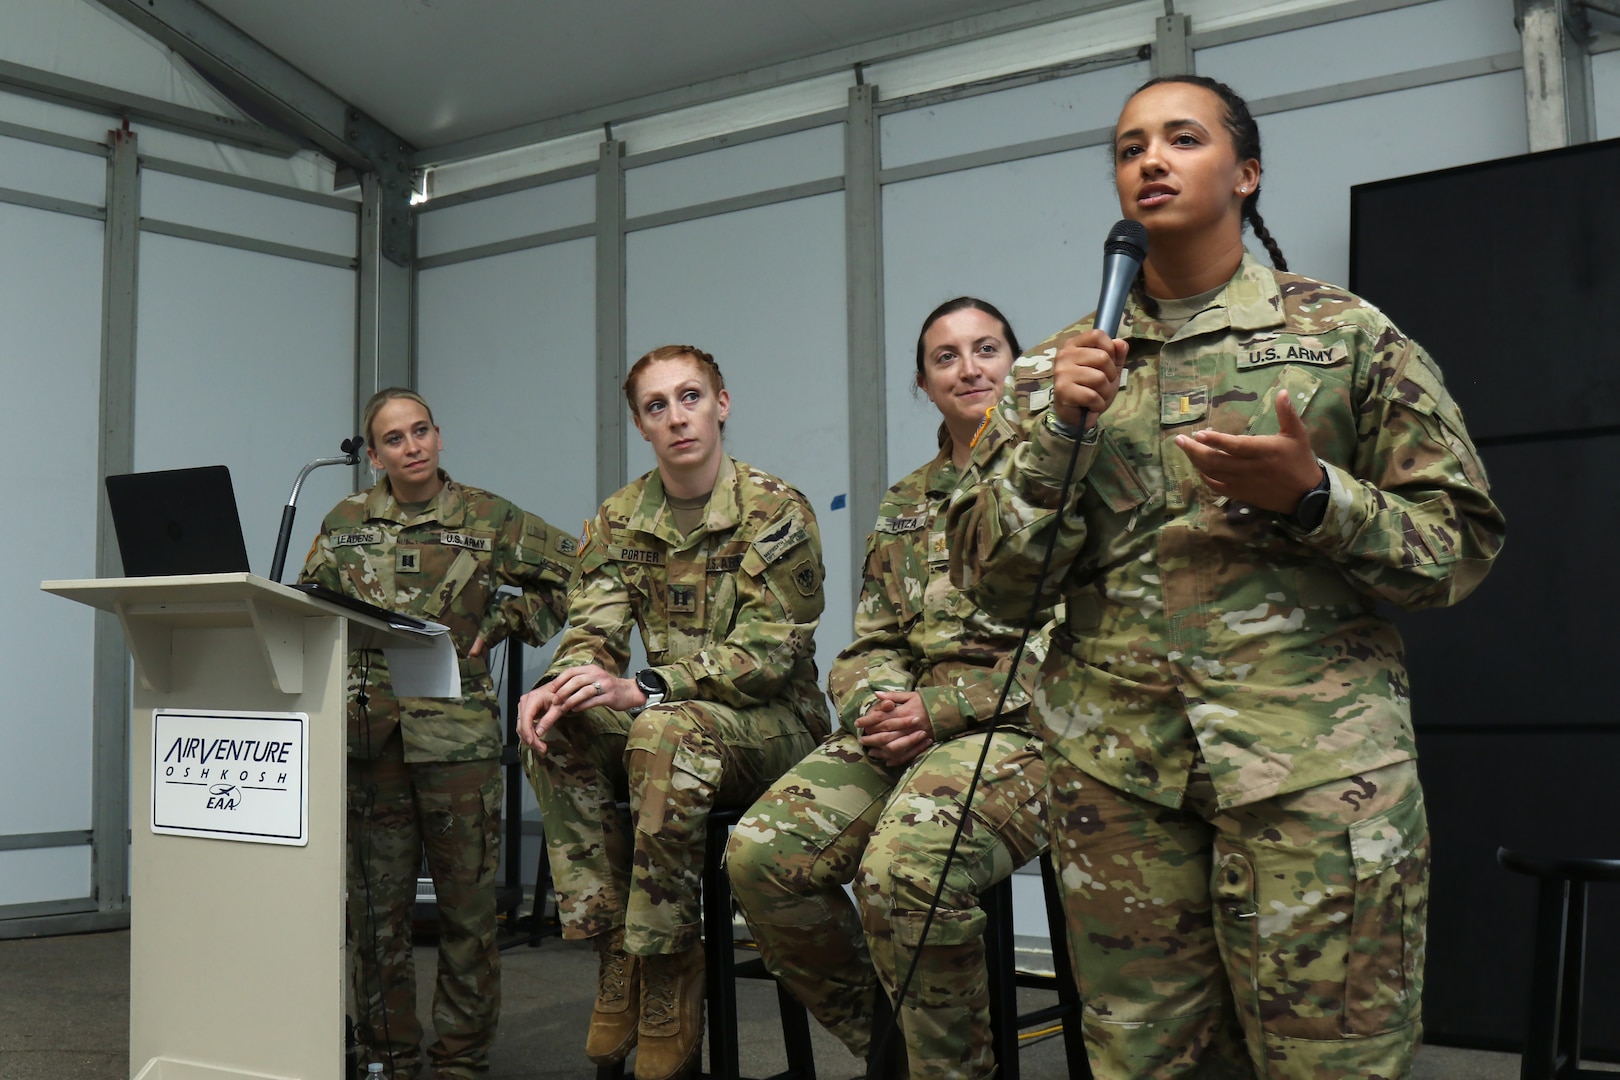 2nd Lt. Charnelle Pinson, a forward support medevac section leader with the Wisconsin Army National Guard’s 1st Battalion, 168th Aviation Regiment in West Bend, Wis., discusses her military career as Maj. Sarah Latza, Capt. Meredith Porter and Capt. Anna Leadens look on during a panel discussion July 26 as part of the Experimental Aircraft Association’s WomenVenture, an effort to honor and promote women’s role in flight during the EAA’s annual AirVenture in Oshkosh, Wis. Wisconsin National Guard photo by Staff Sgt. Alice Ripberger